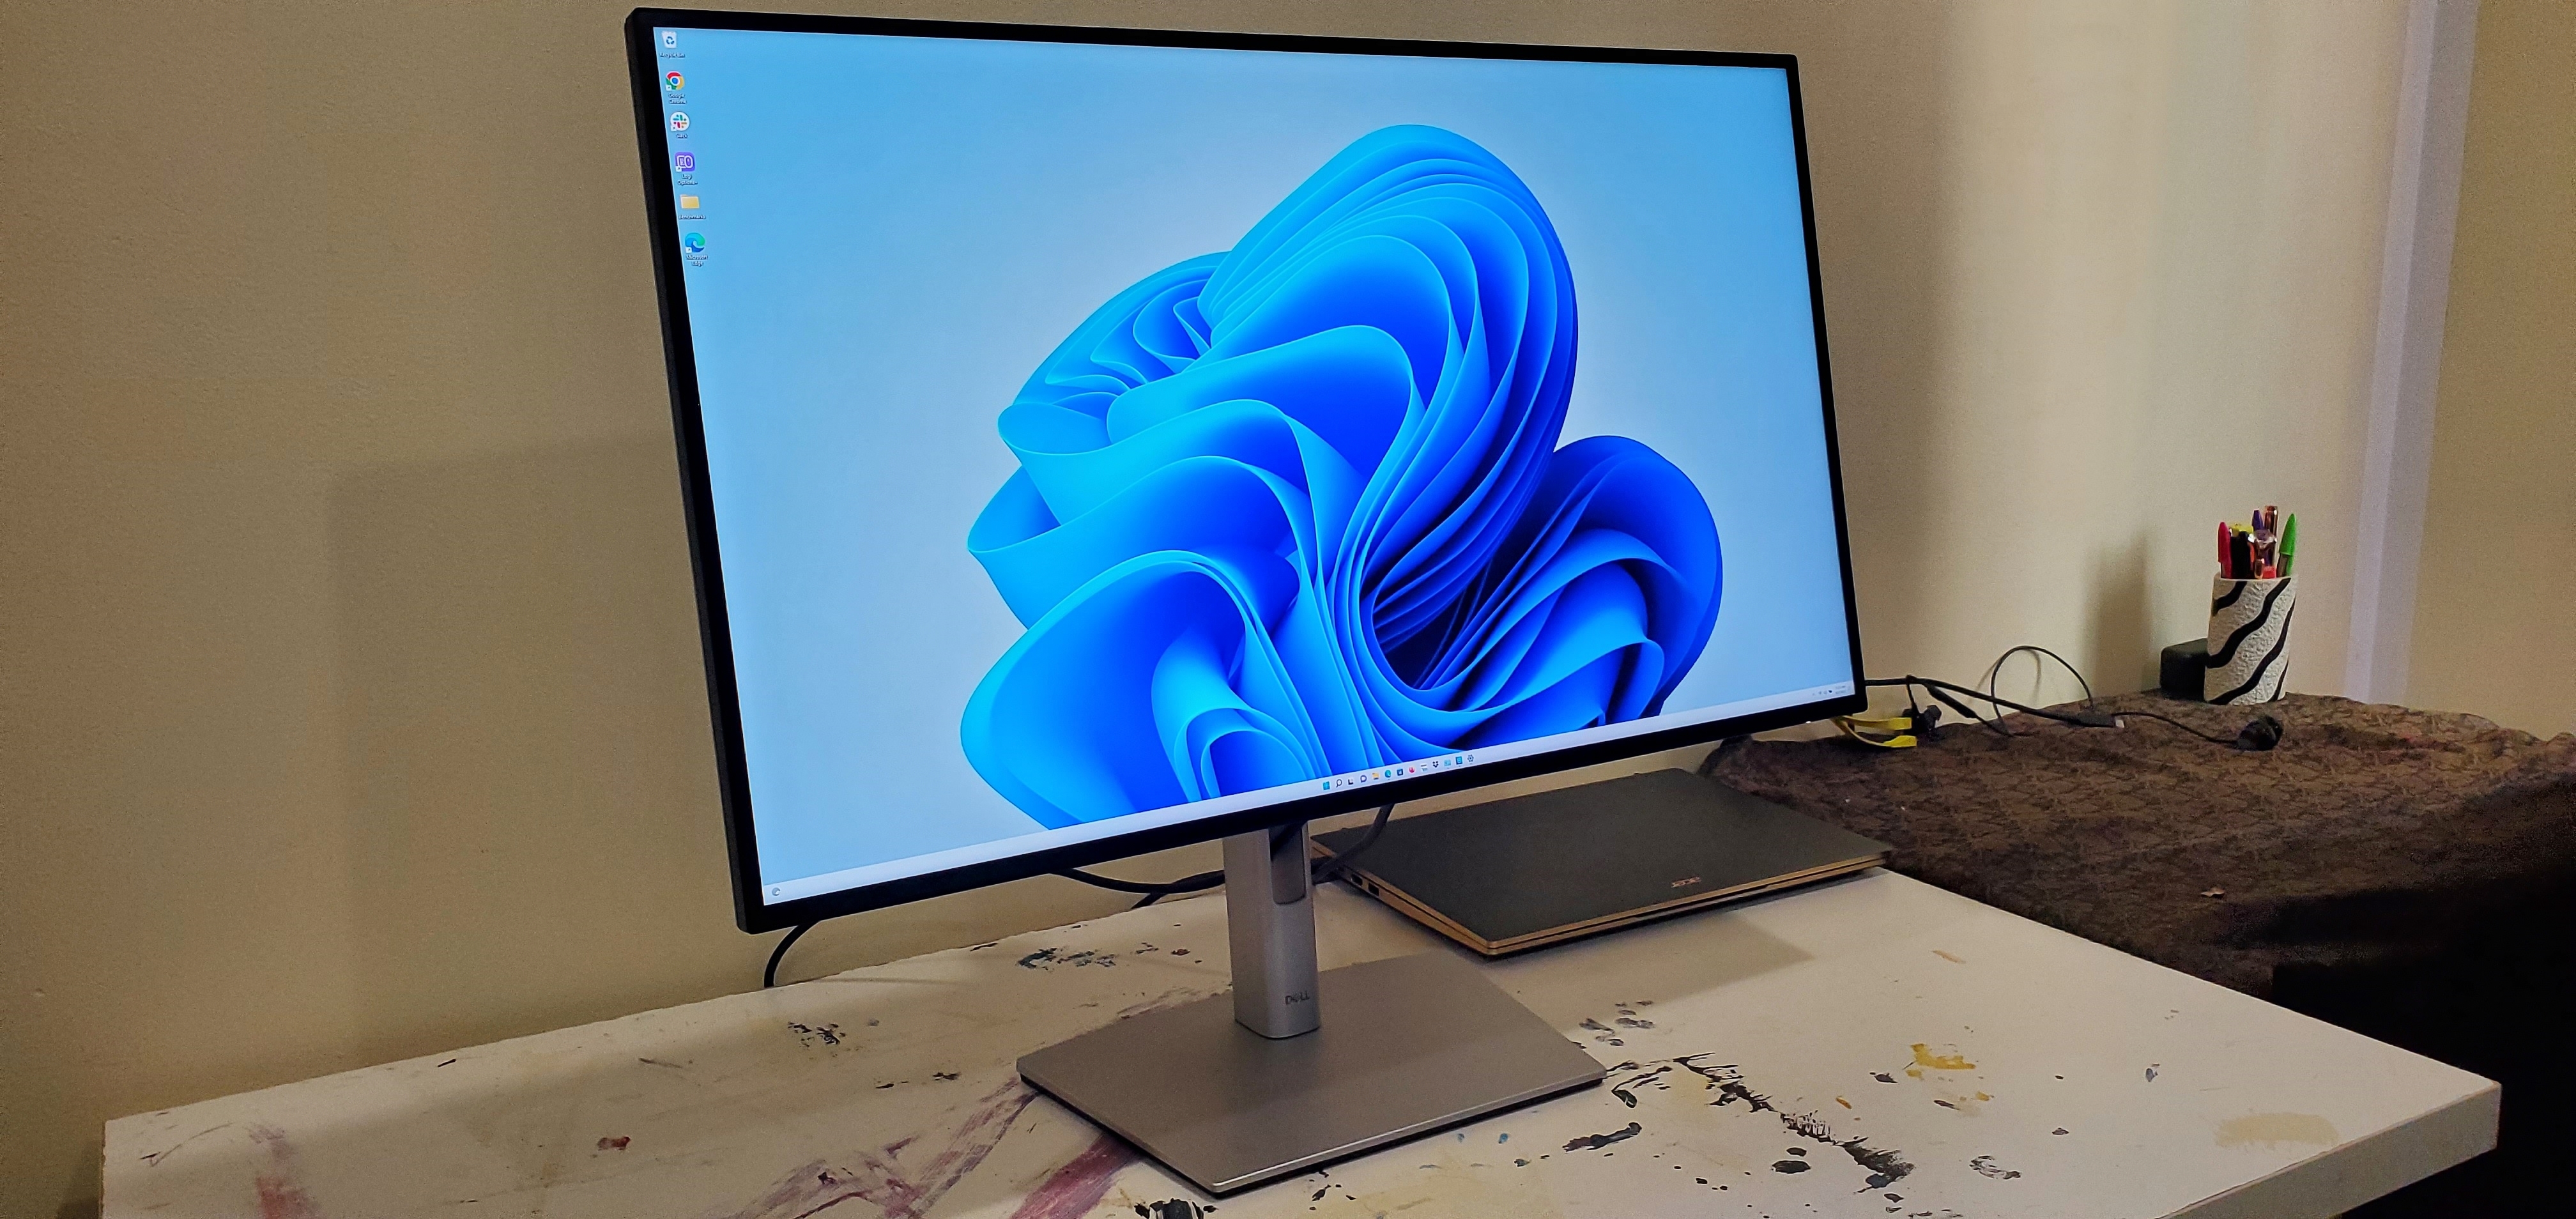 IPS Black brings impressive contrast and vivid colors to Dell's 